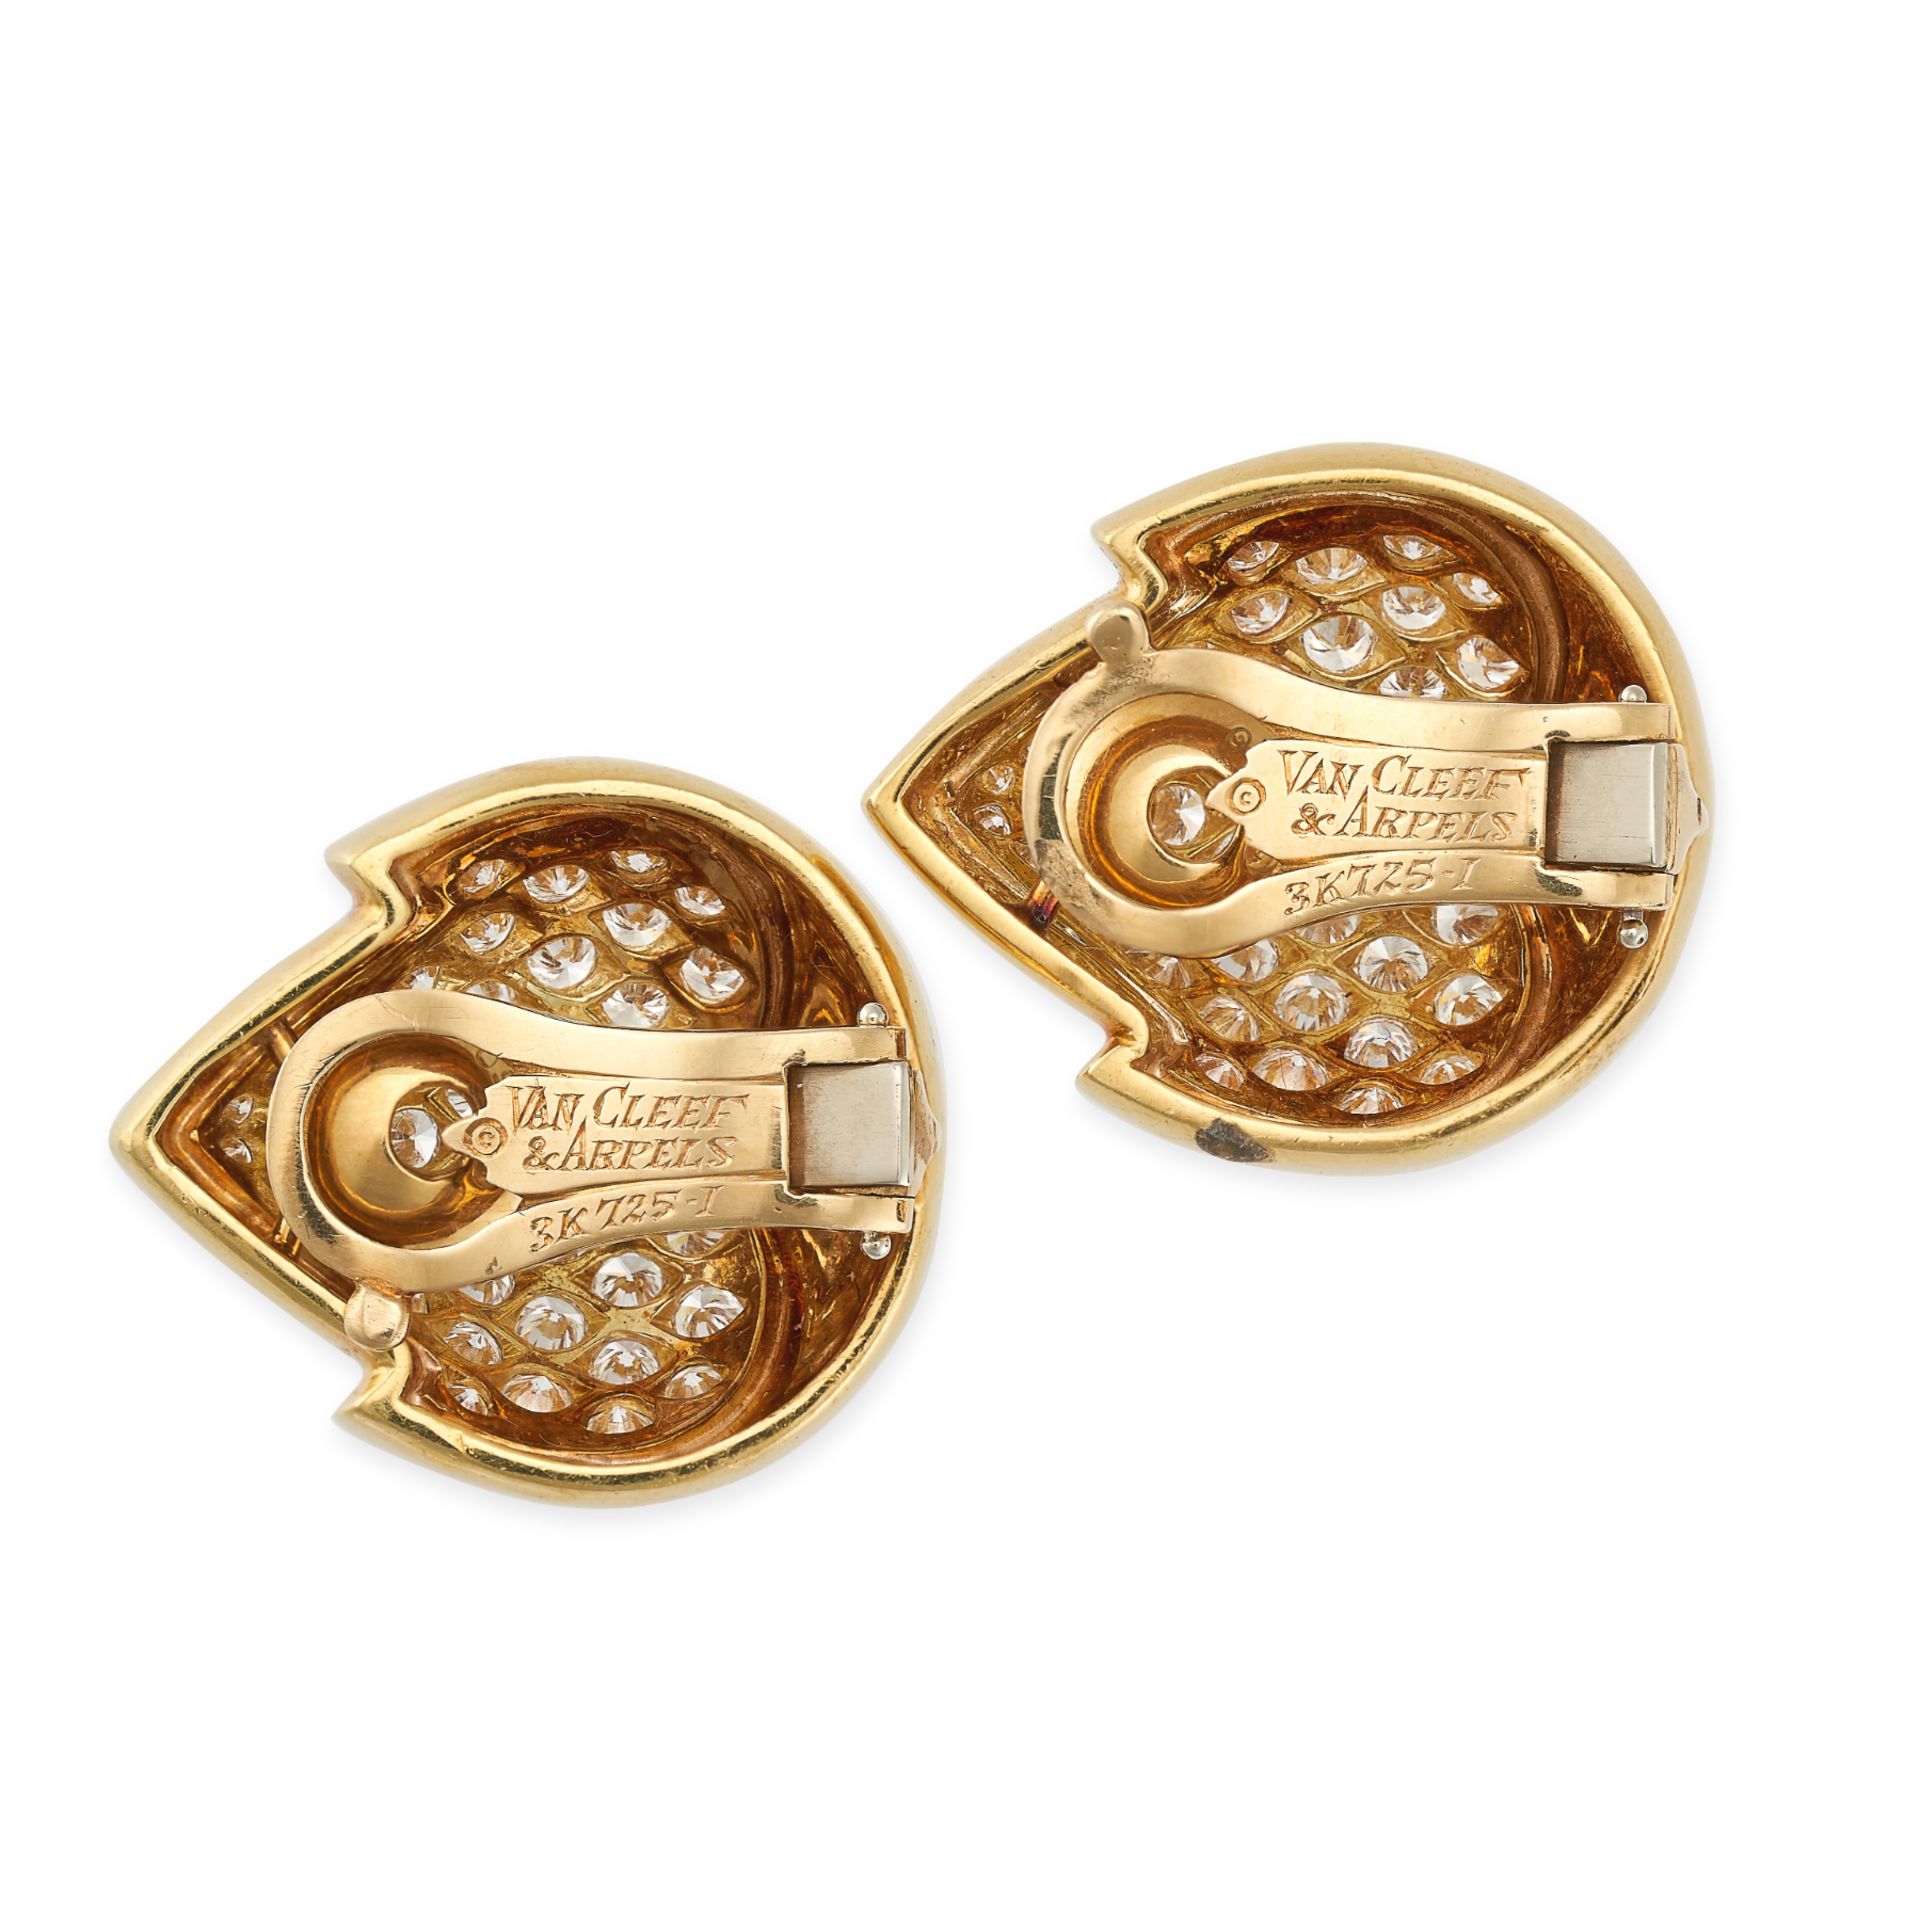 VAN CLEEF & ARPELS, A PAIR OF VINTAGE DIAMOND CLIP EARRINGS in 18ct yellow gold, in a stylised - Image 2 of 2